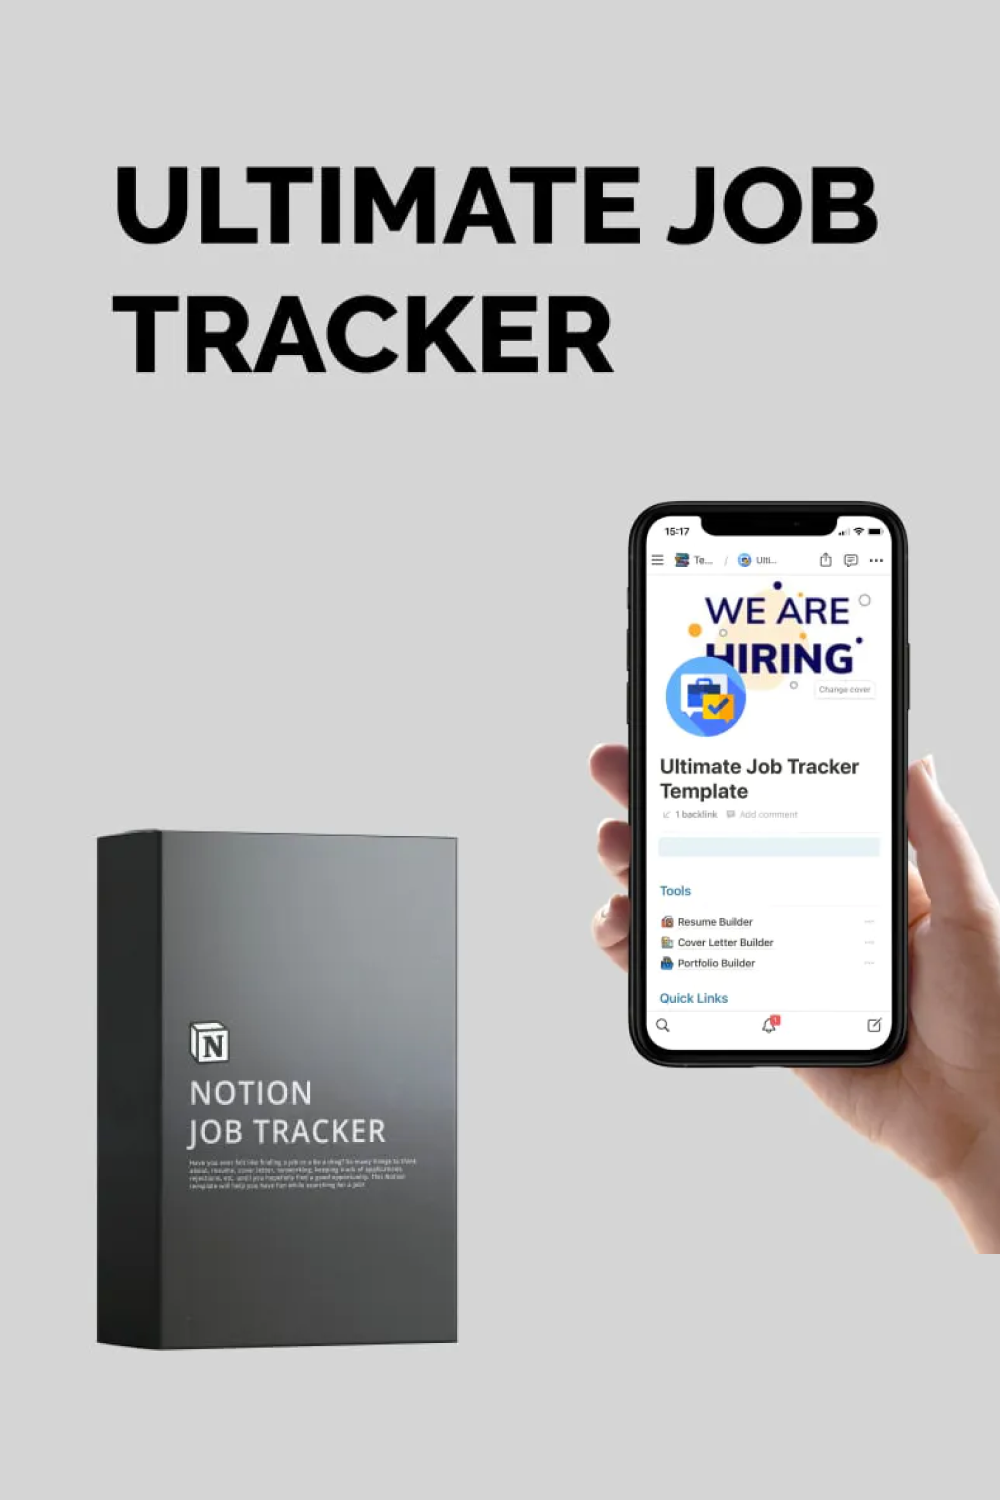 Tracking on any device.